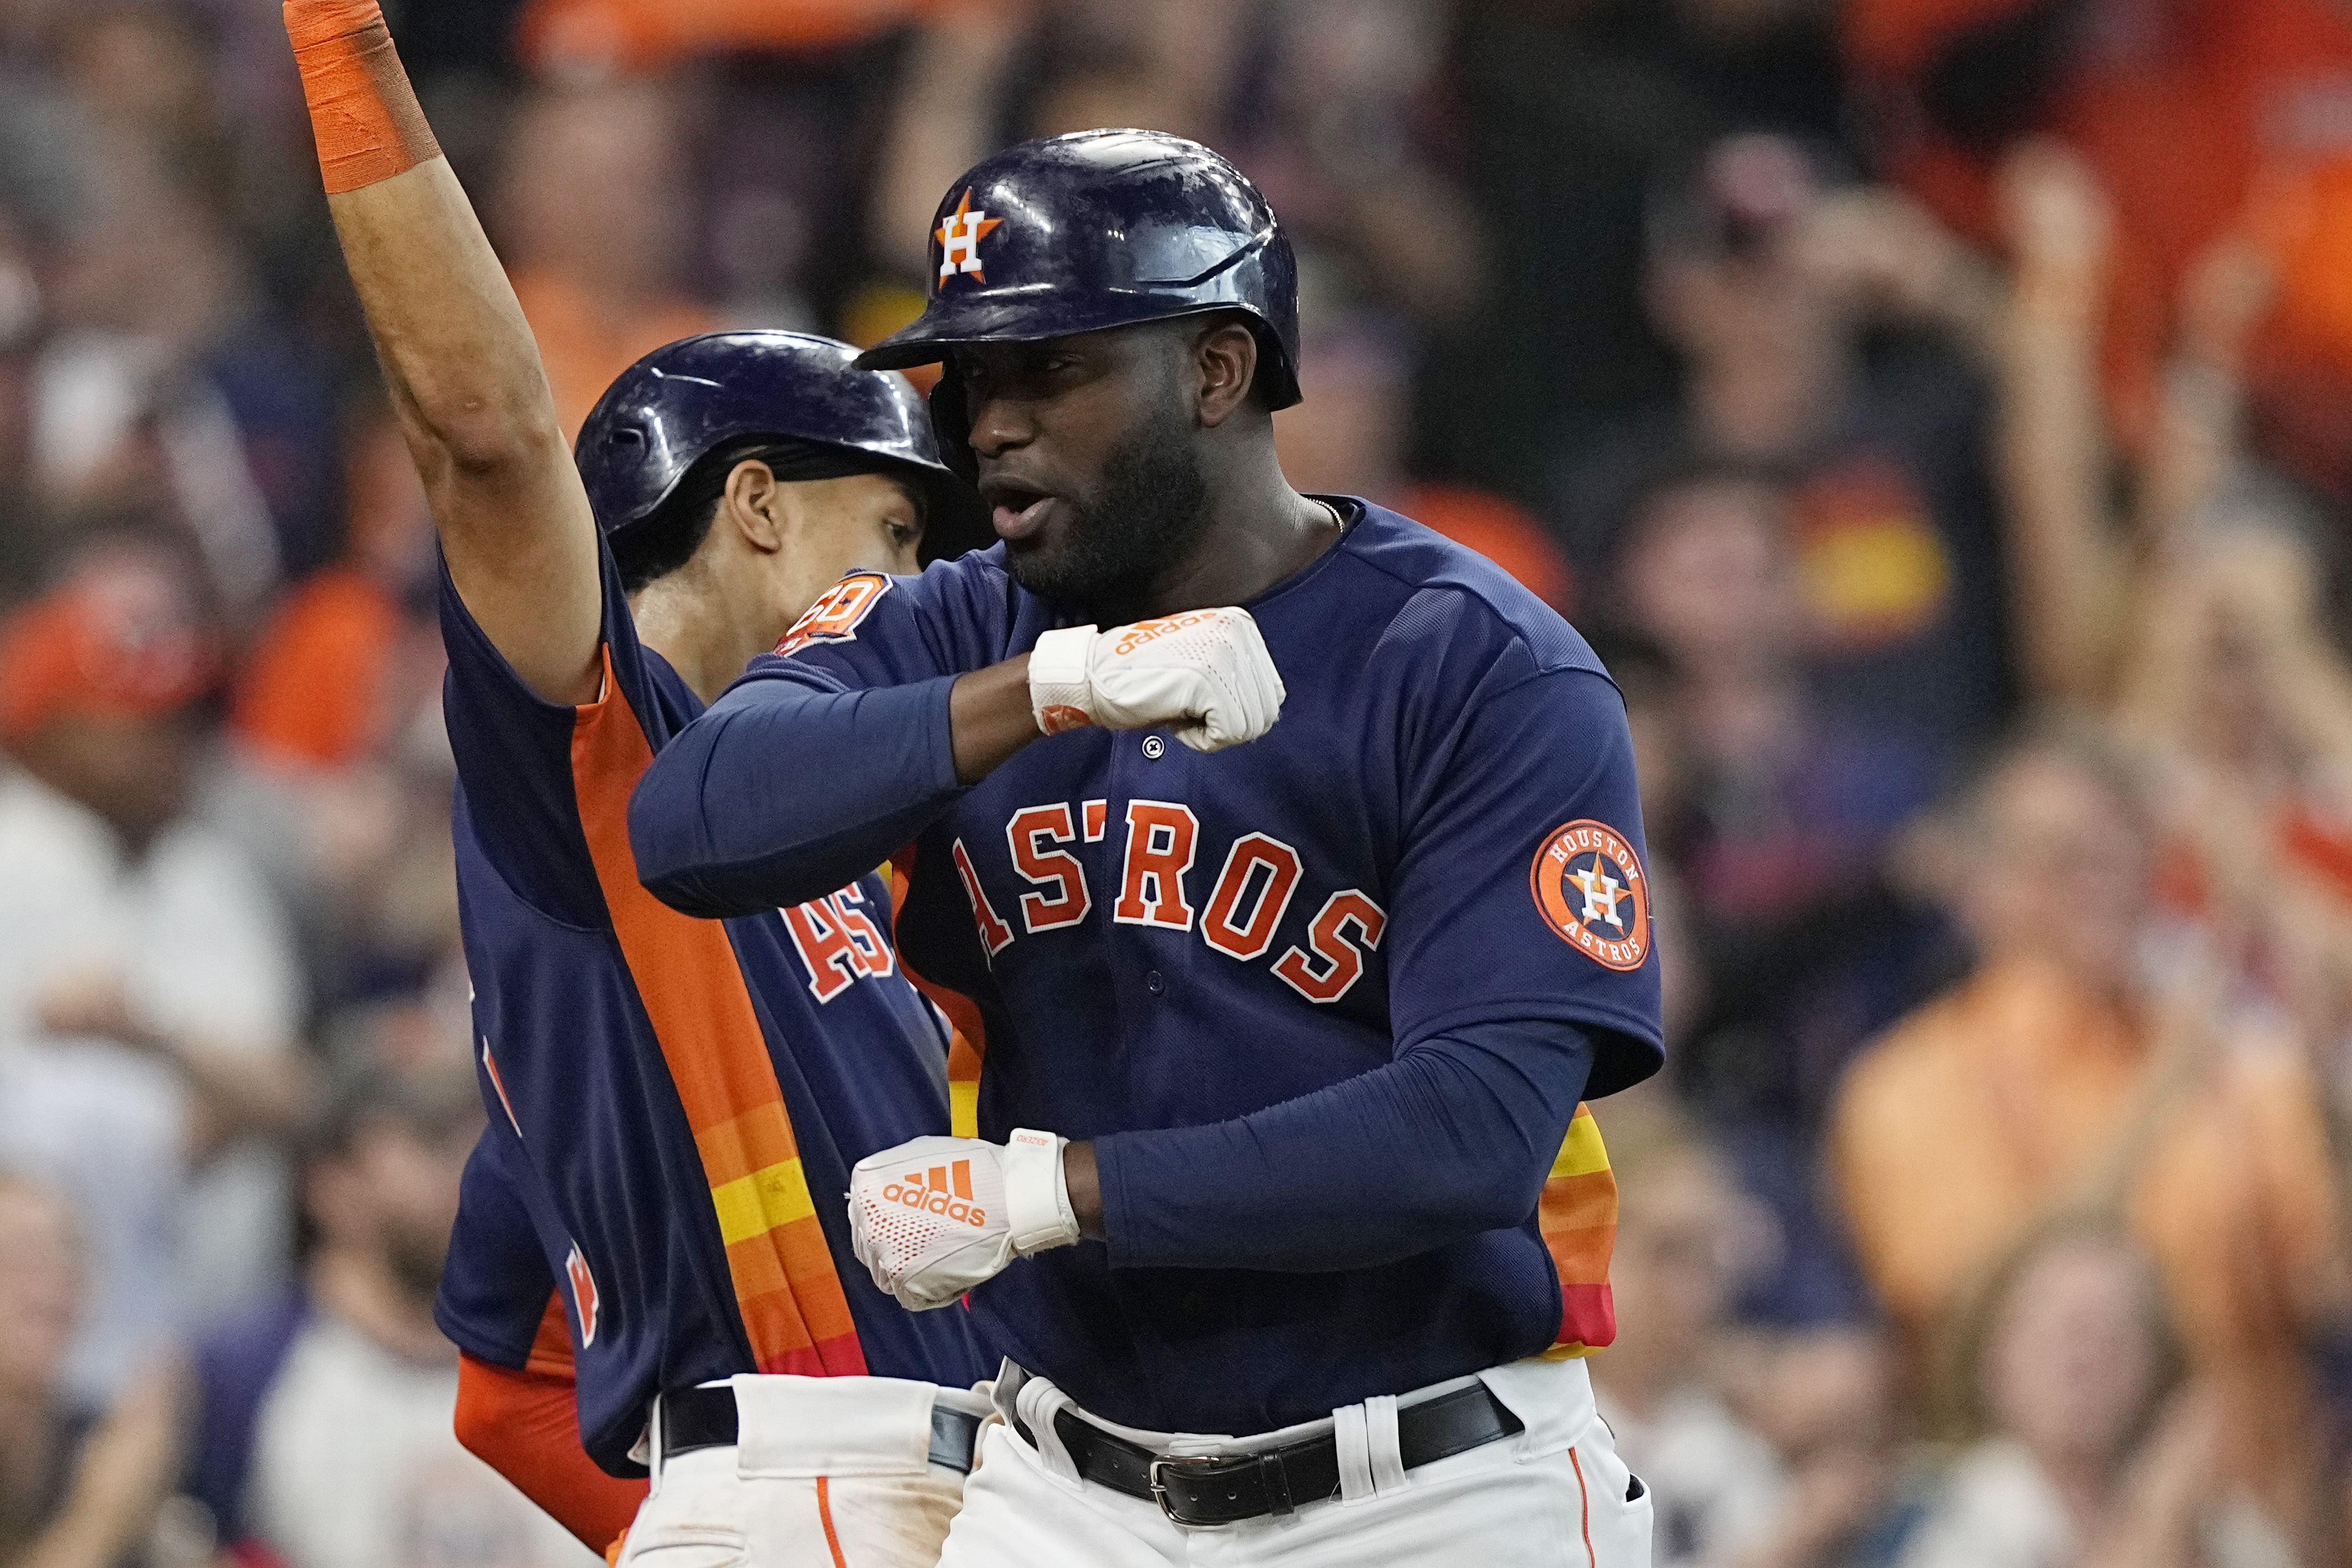 If the Astros have been overlooked this season, the return of Alvarez and  Altuve could change that - ABC News